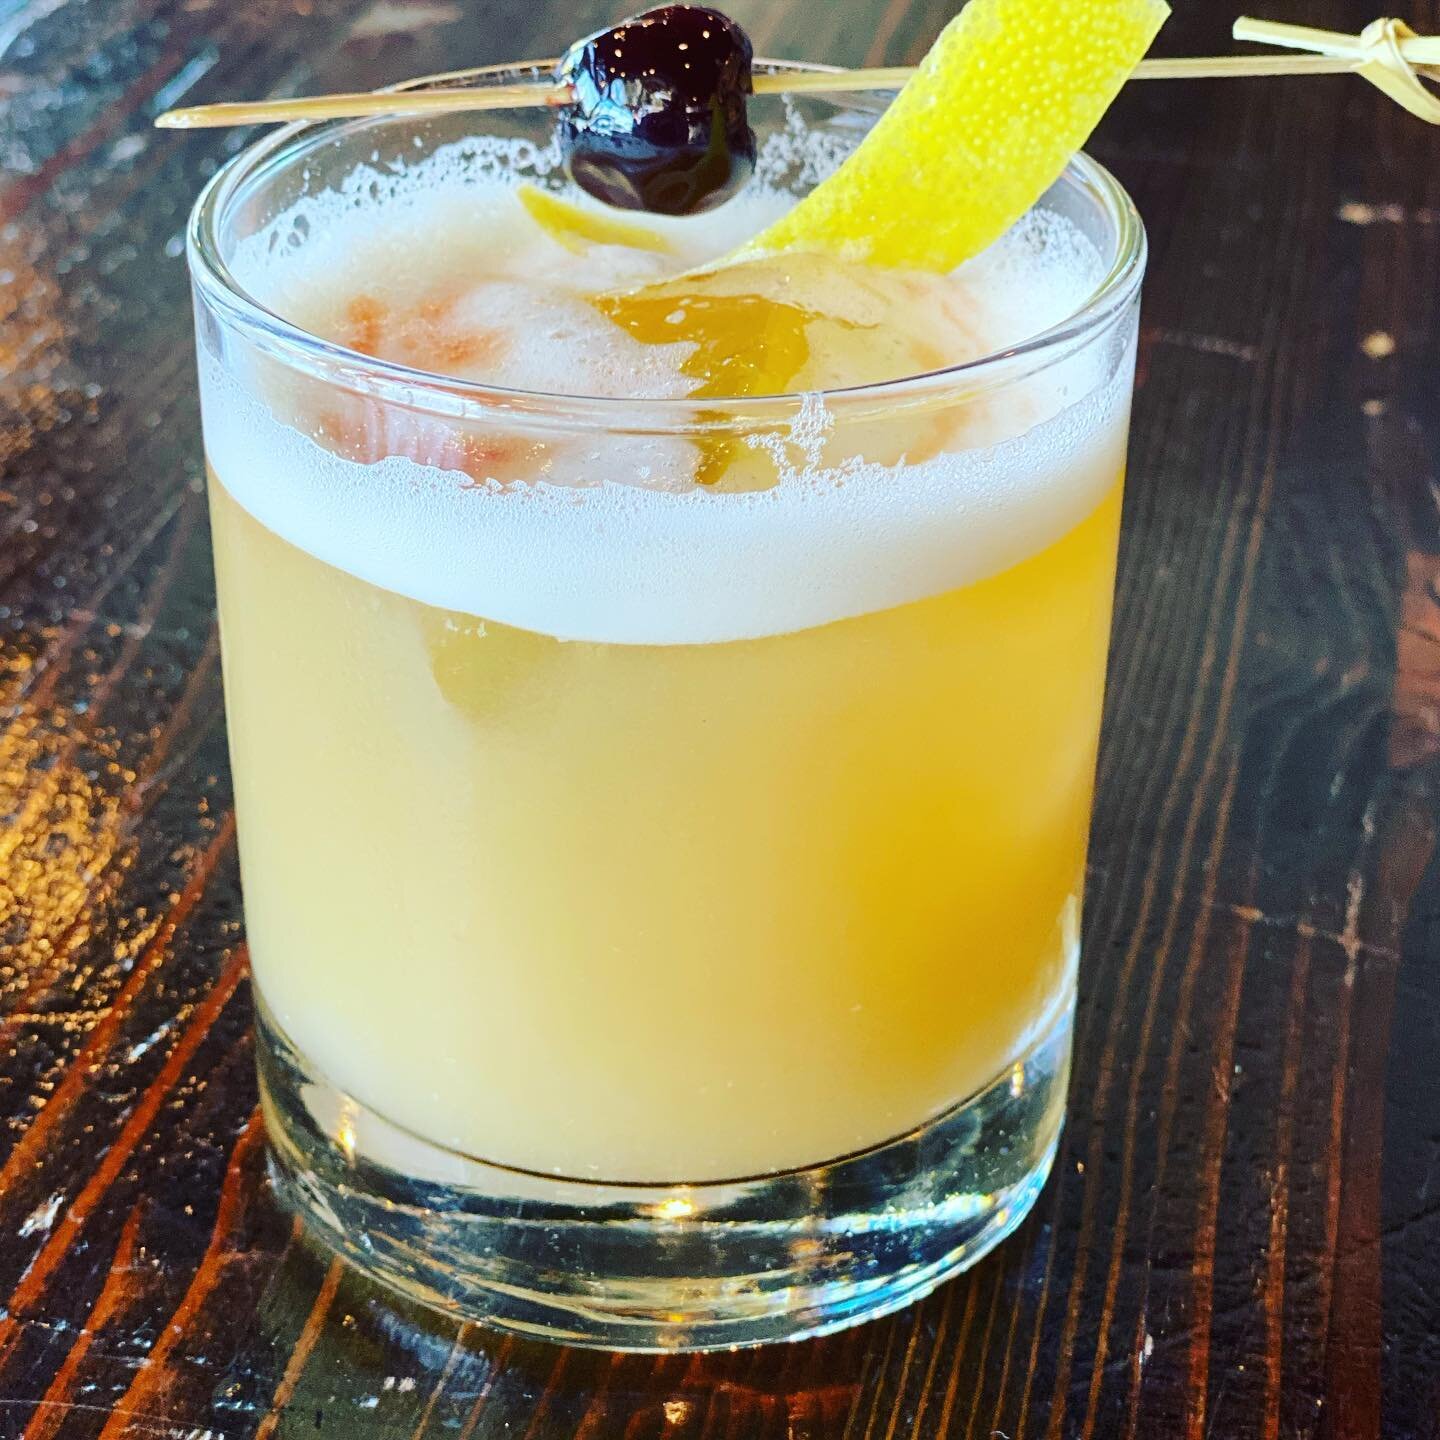 Nothing like a well balanced Ameretto sour out on our patio, Made following Mr.Morgenthalers recipe. #larceny #larcenybourbon #larcenybarrelproof #drinks #drinks🍹 #drinkstagram #drinksofinstagram #cocktails #cocktailsofinstagram #amarettosour #bourb